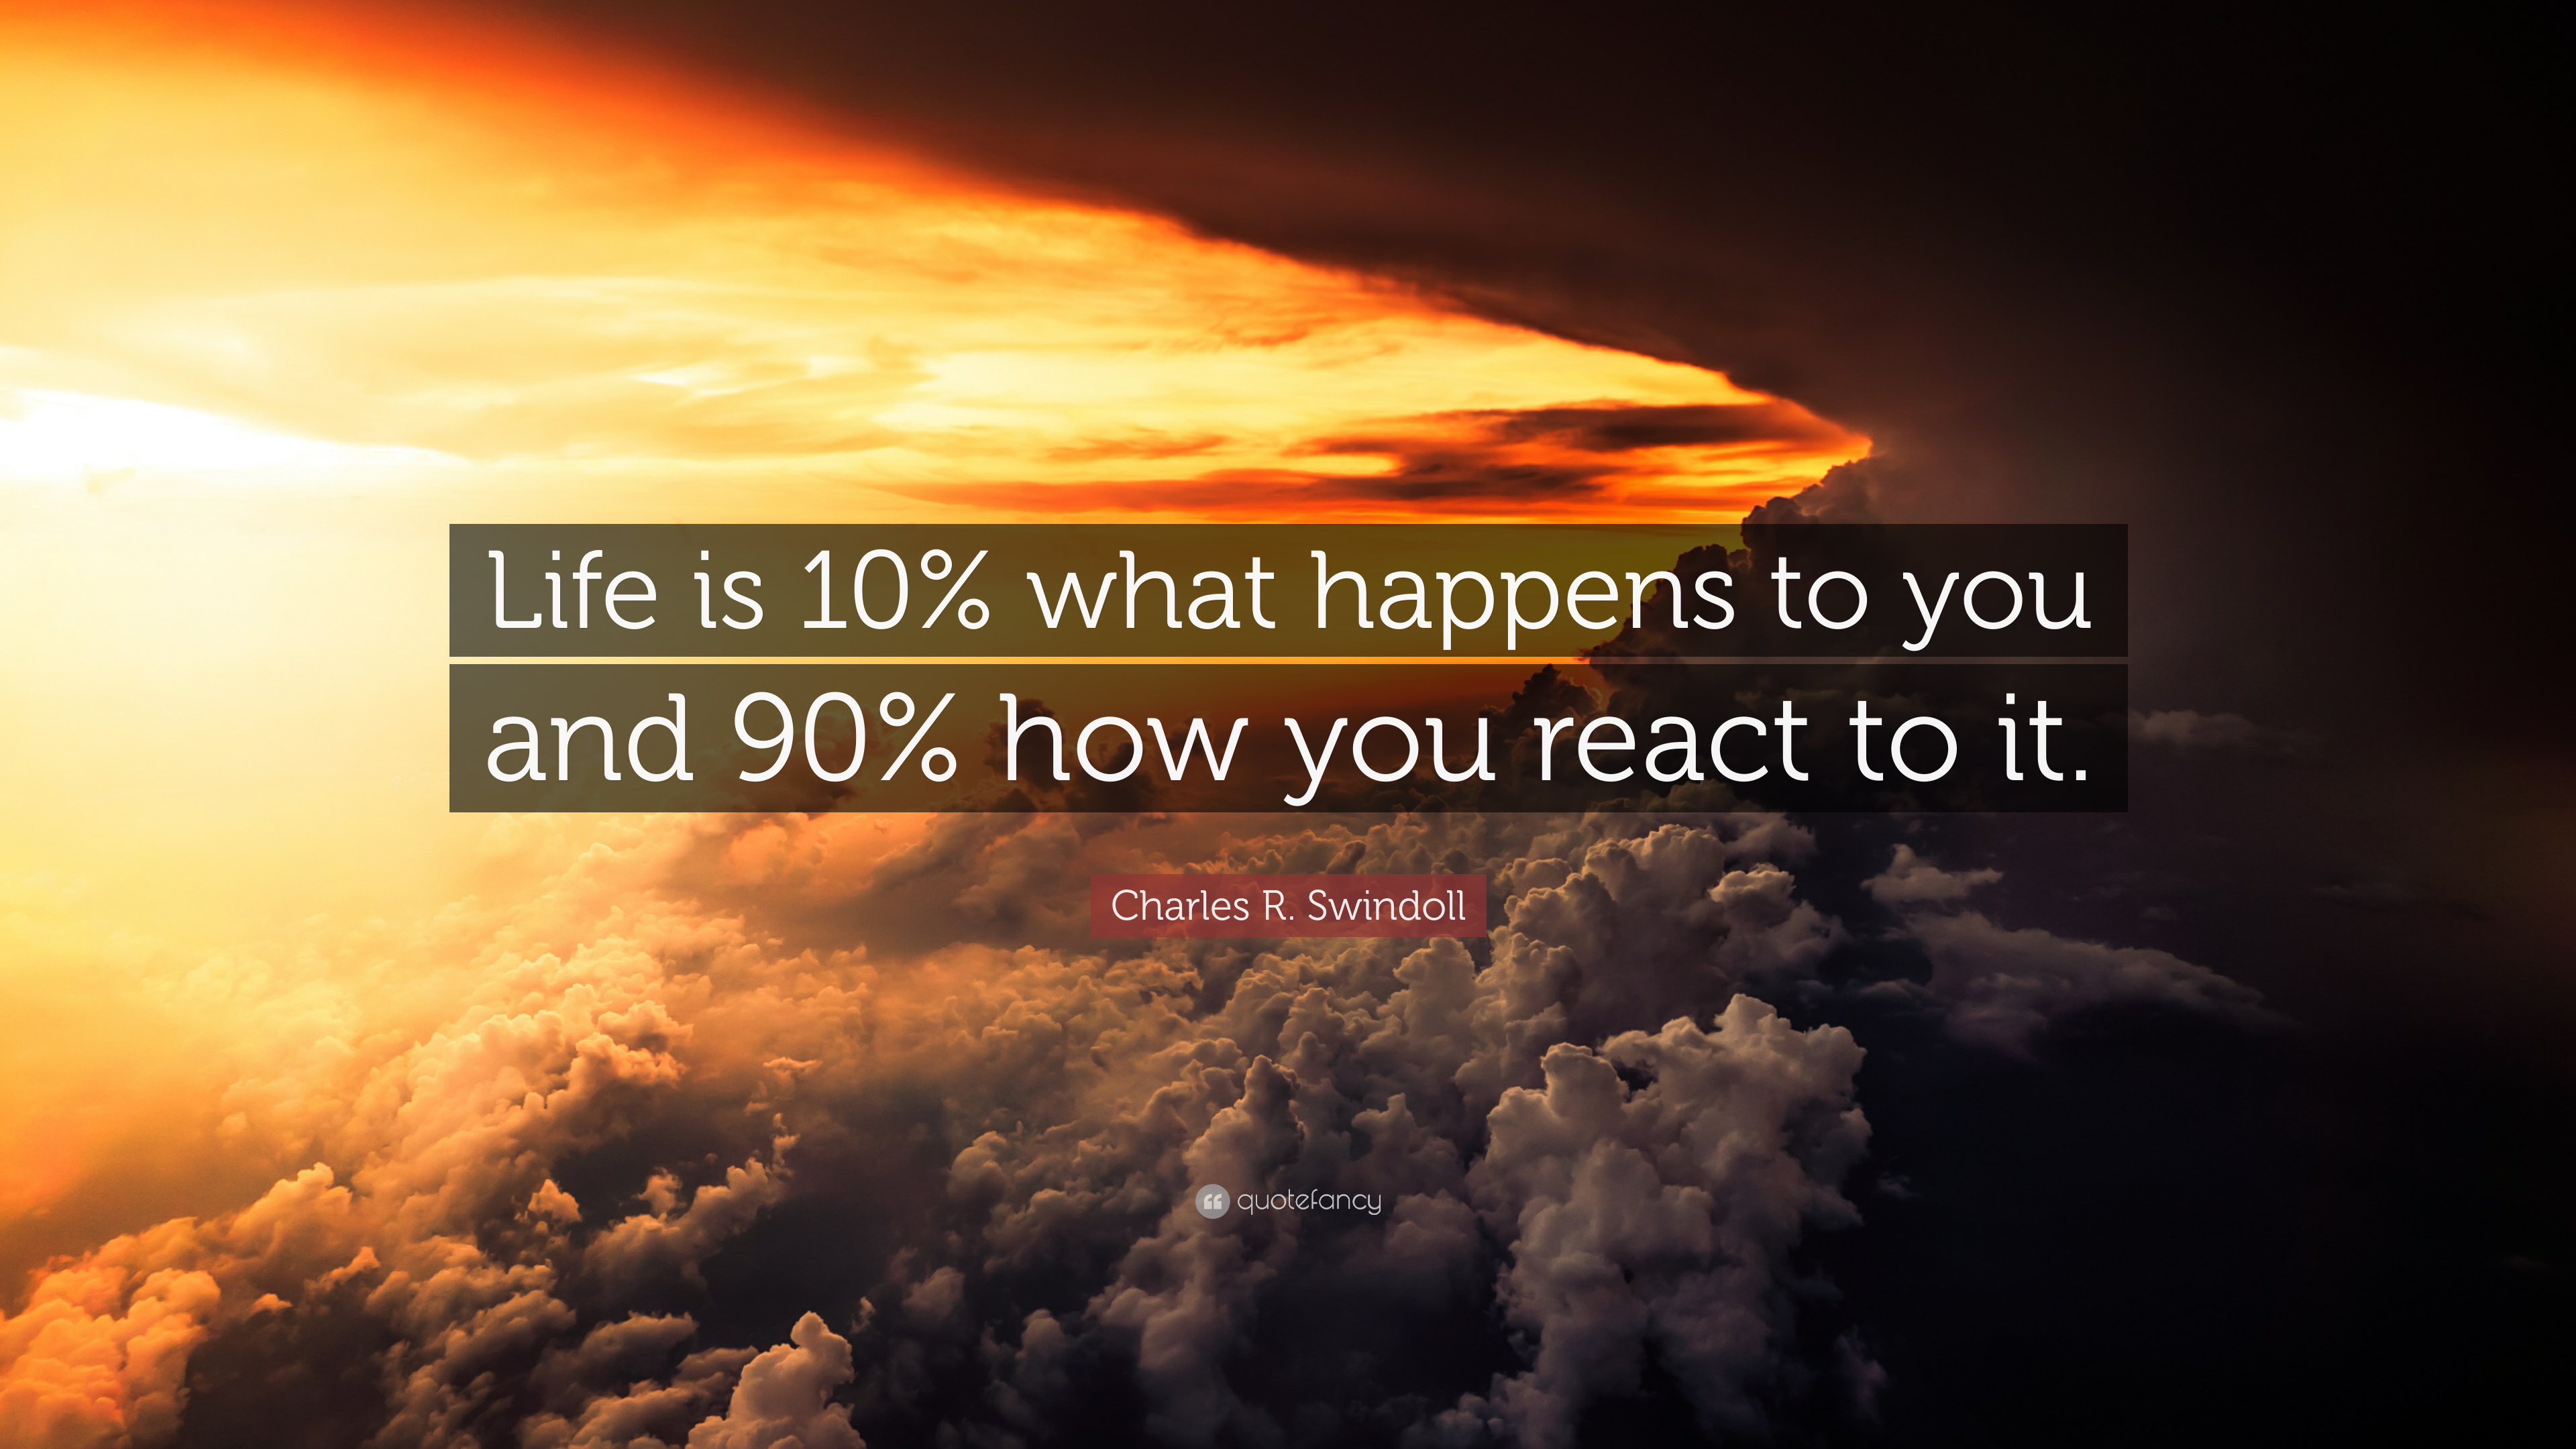 Charles R. Swindoll Quote: “Life is 10% what happens to you and 90